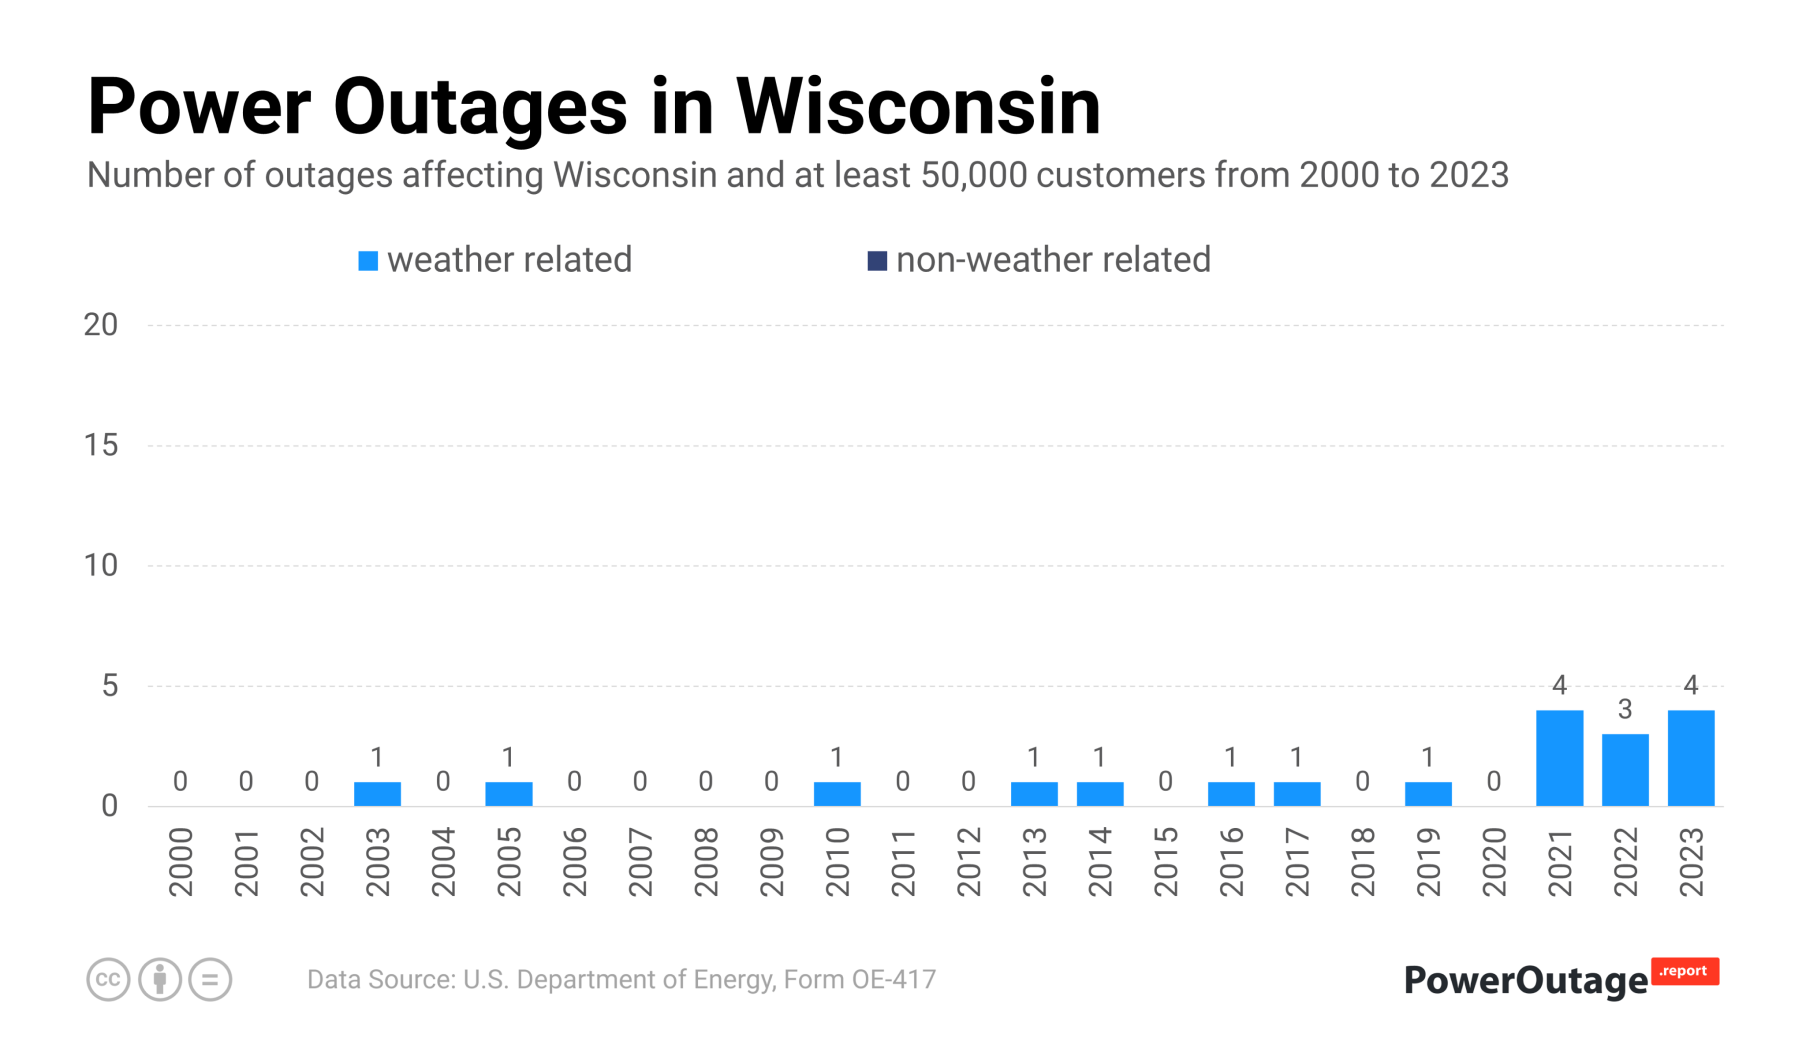 Wisconsin Power Outage Statistics (2000 - 2022)